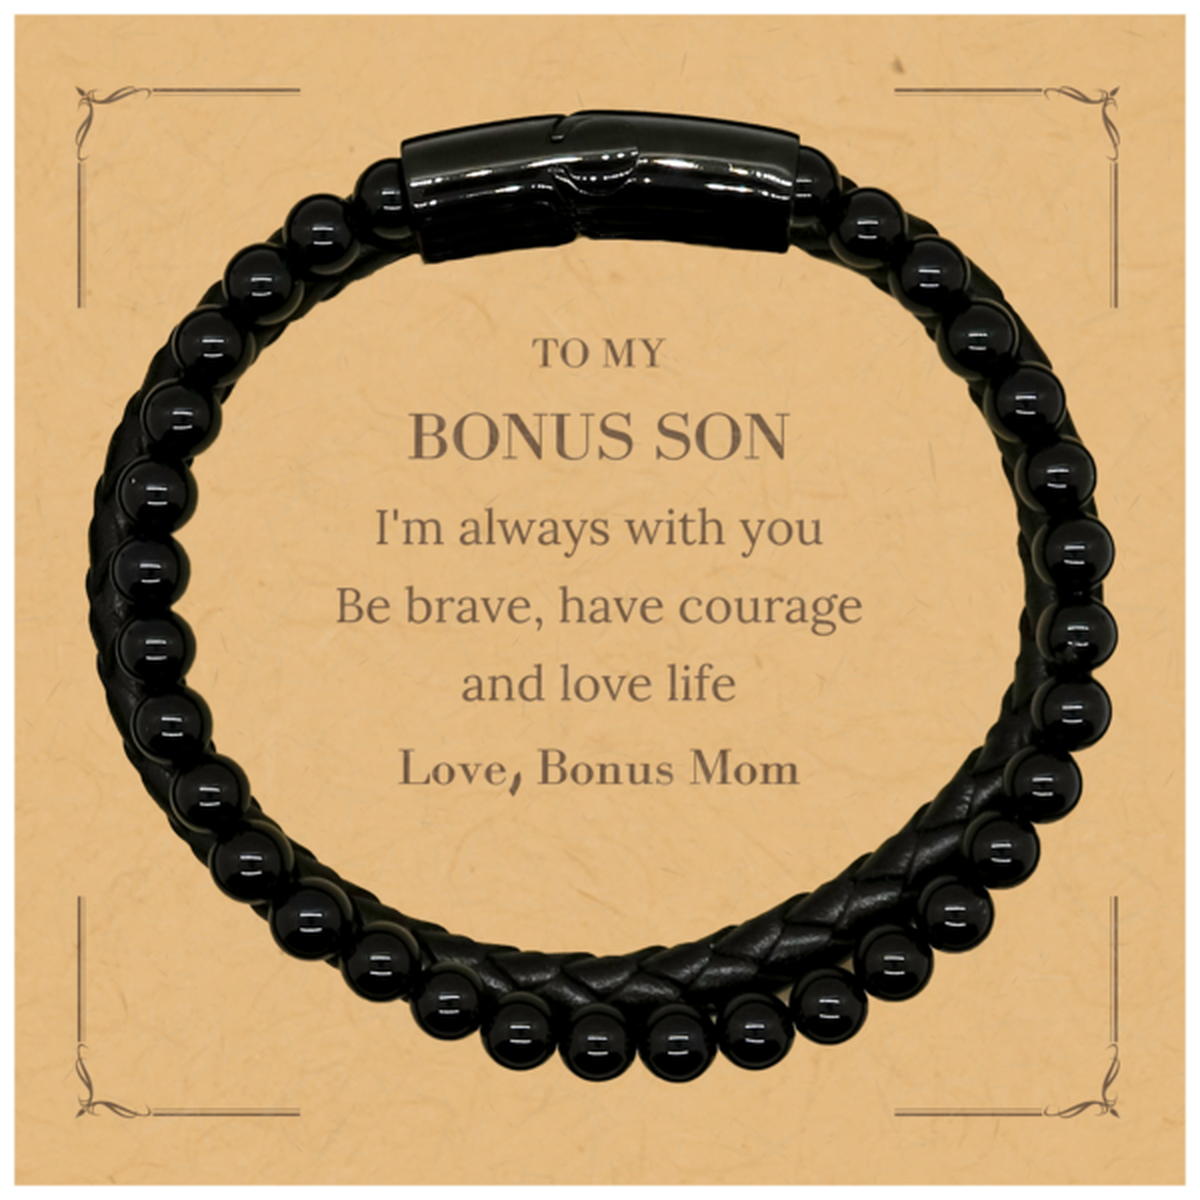 To My Bonus Son Gifts from Bonus Mom, Unique Stone Leather Bracelets Inspirational Christmas Birthday Graduation Gifts for Bonus Son I'm always with you. Be brave, have courage and love life. Love, Bonus Mom